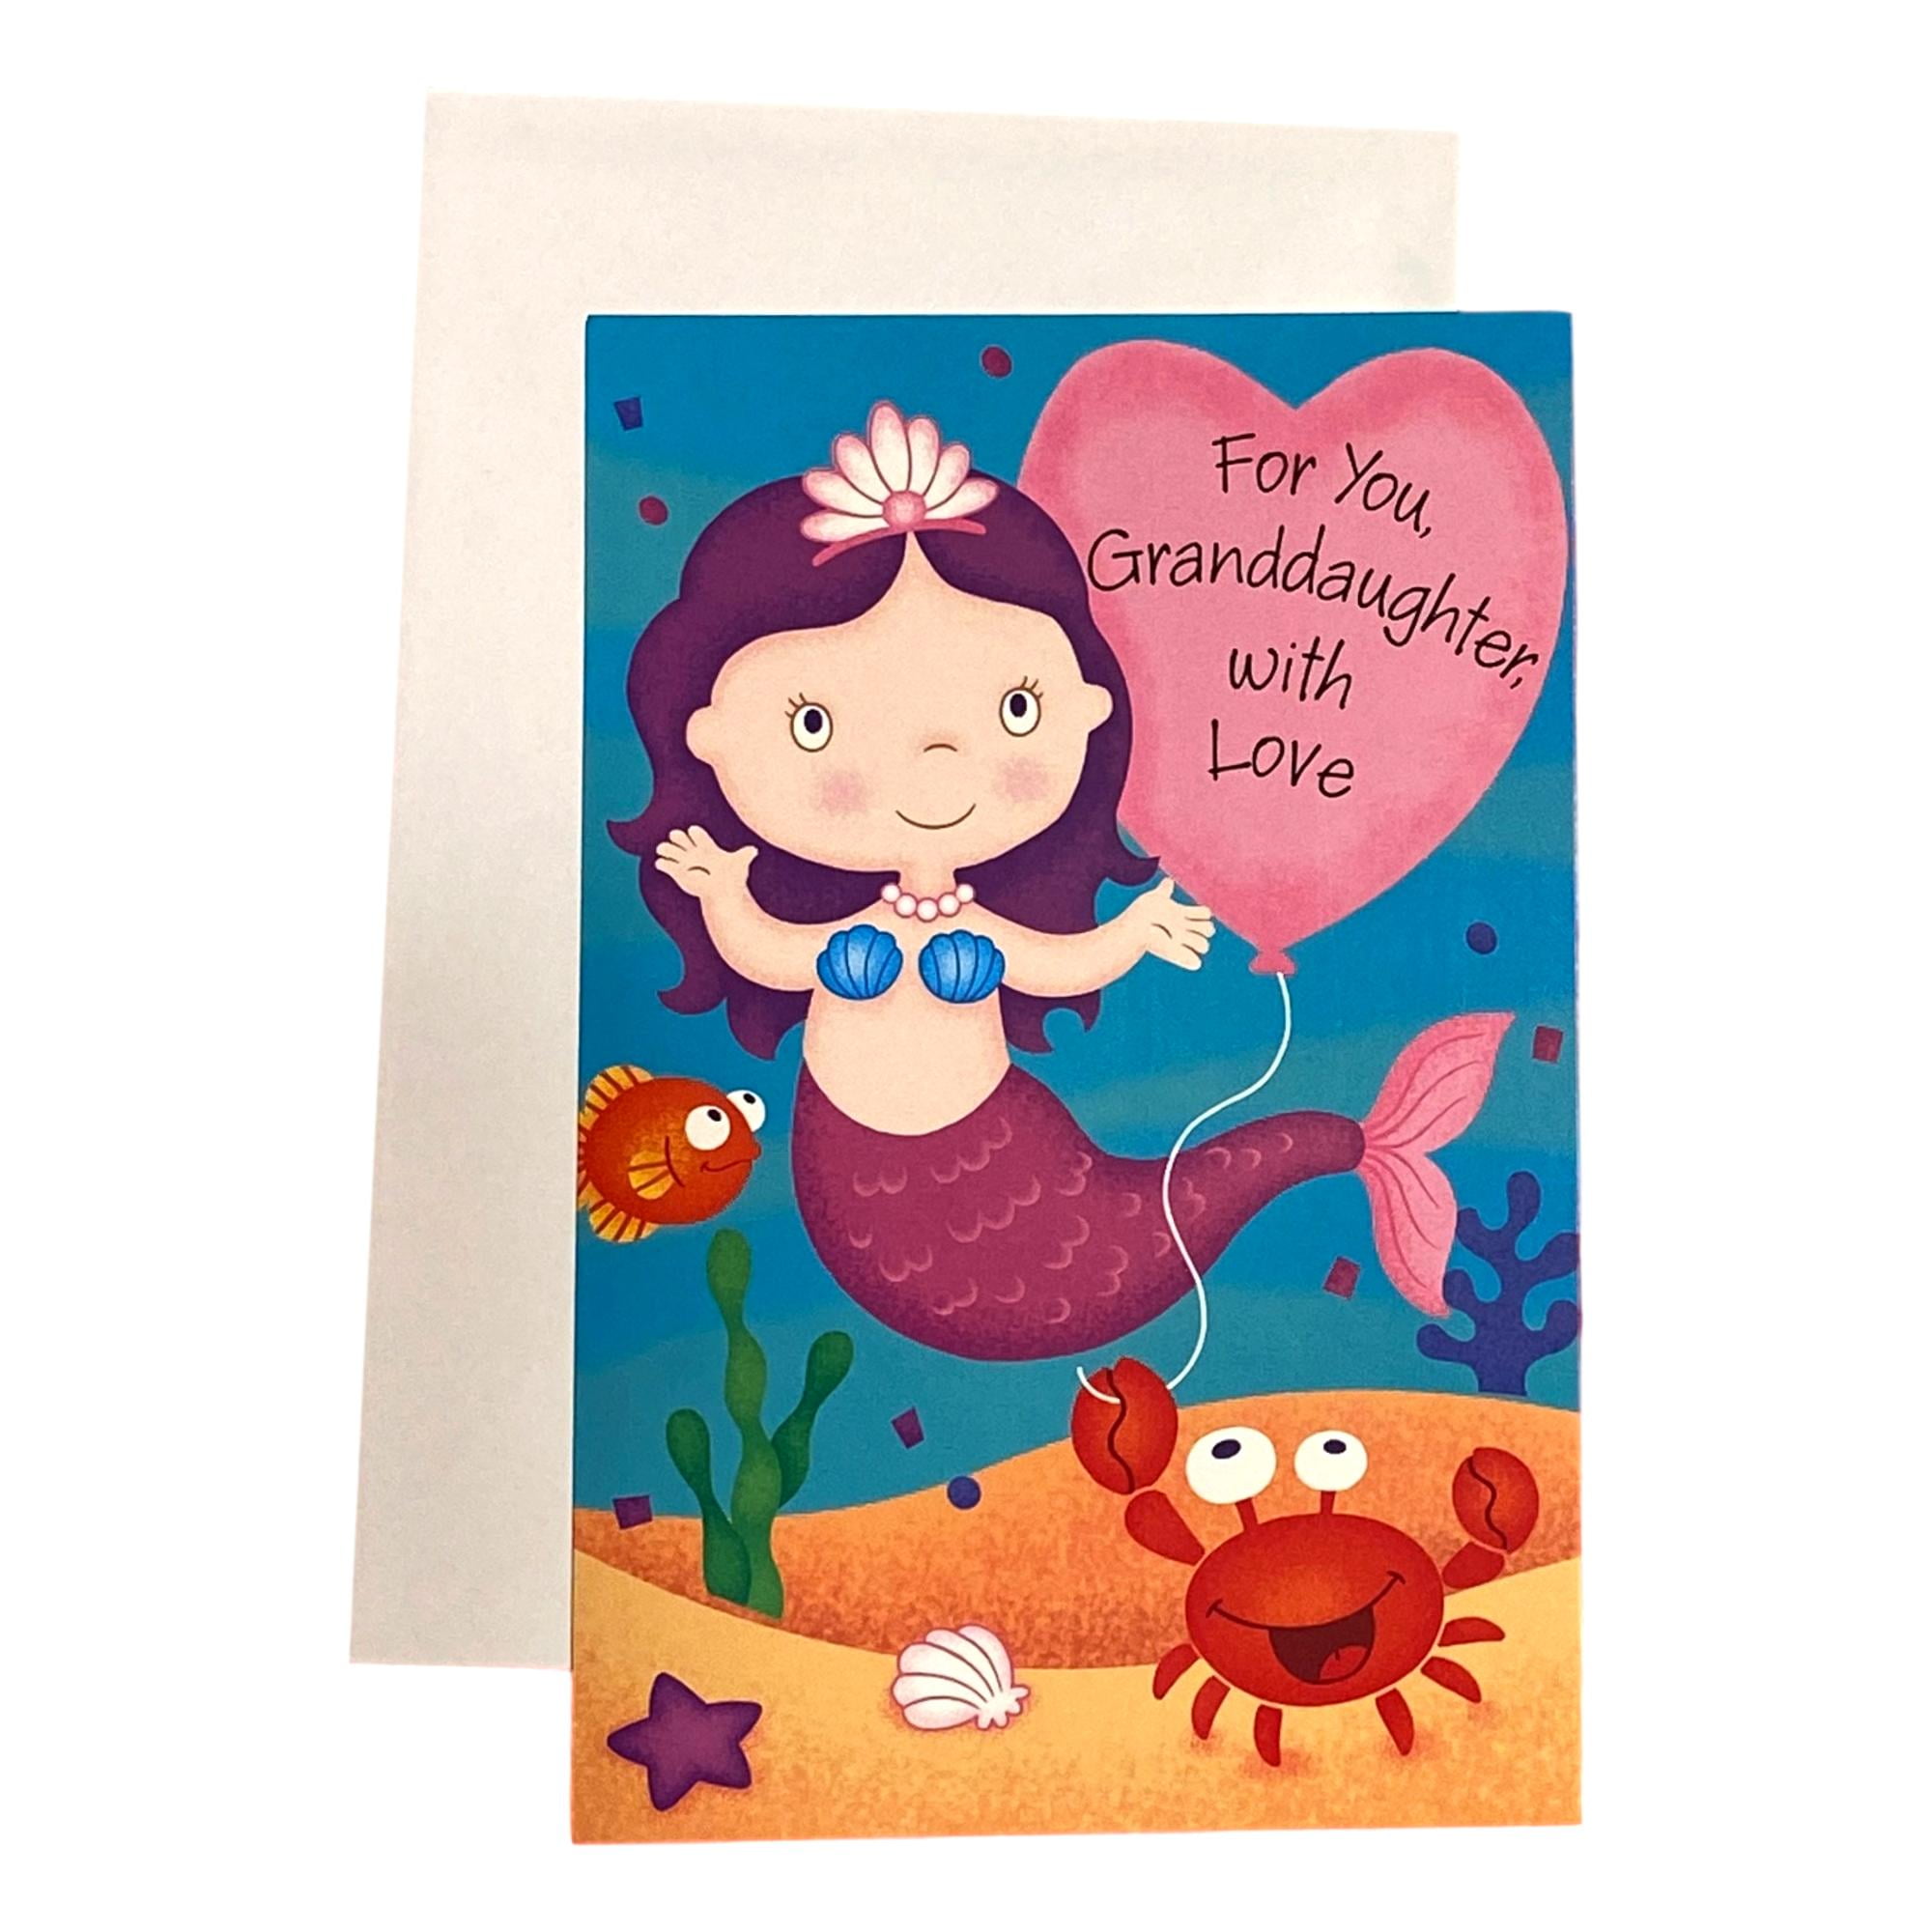 Happy Valentines Day Granddaughter 22550 Juvenile Valentines Greeting Card